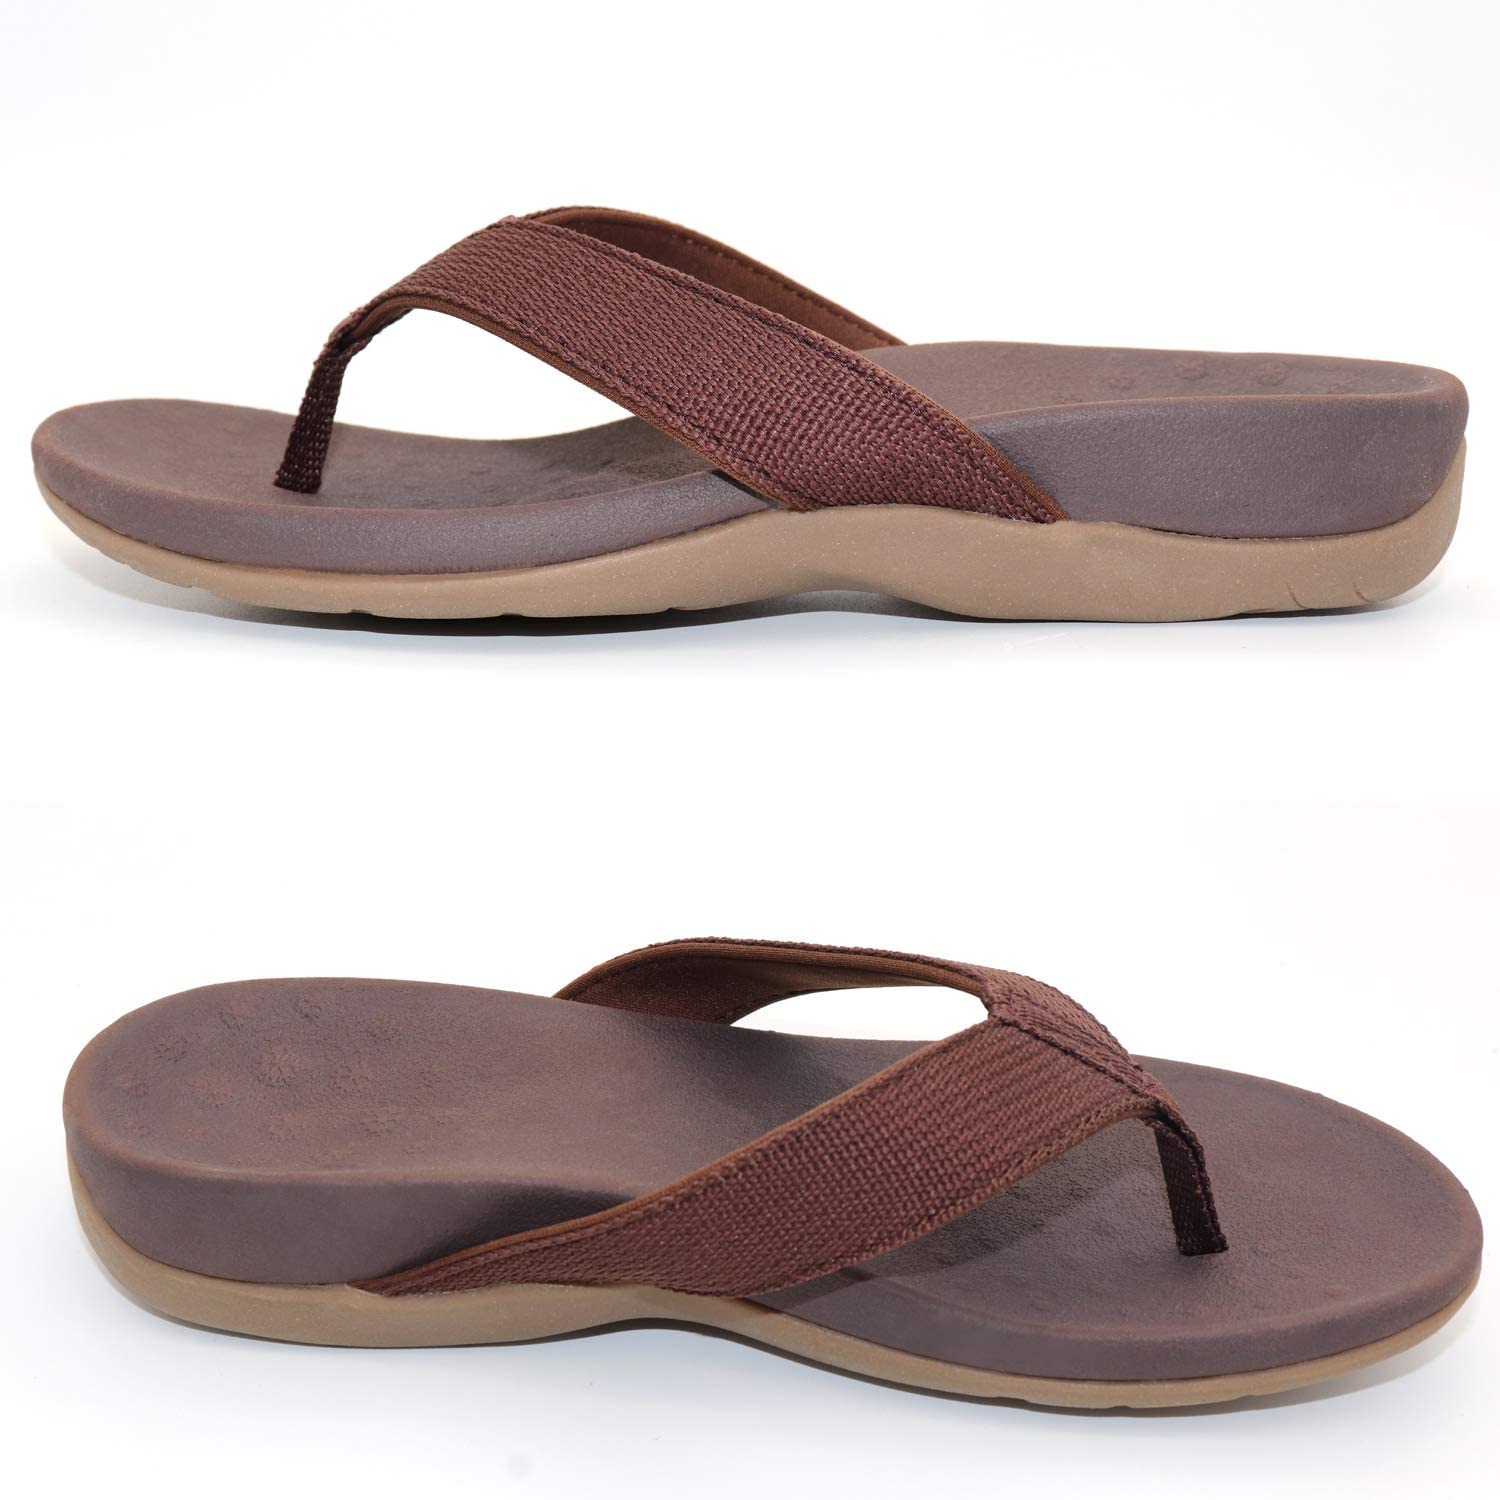 Arch Support Sandals For Women Orthotic Thong Flip Flops Toe Post Sandal For Plantar Fasciitis Flat Feet Heel Pain Brown C32daccd96e518 